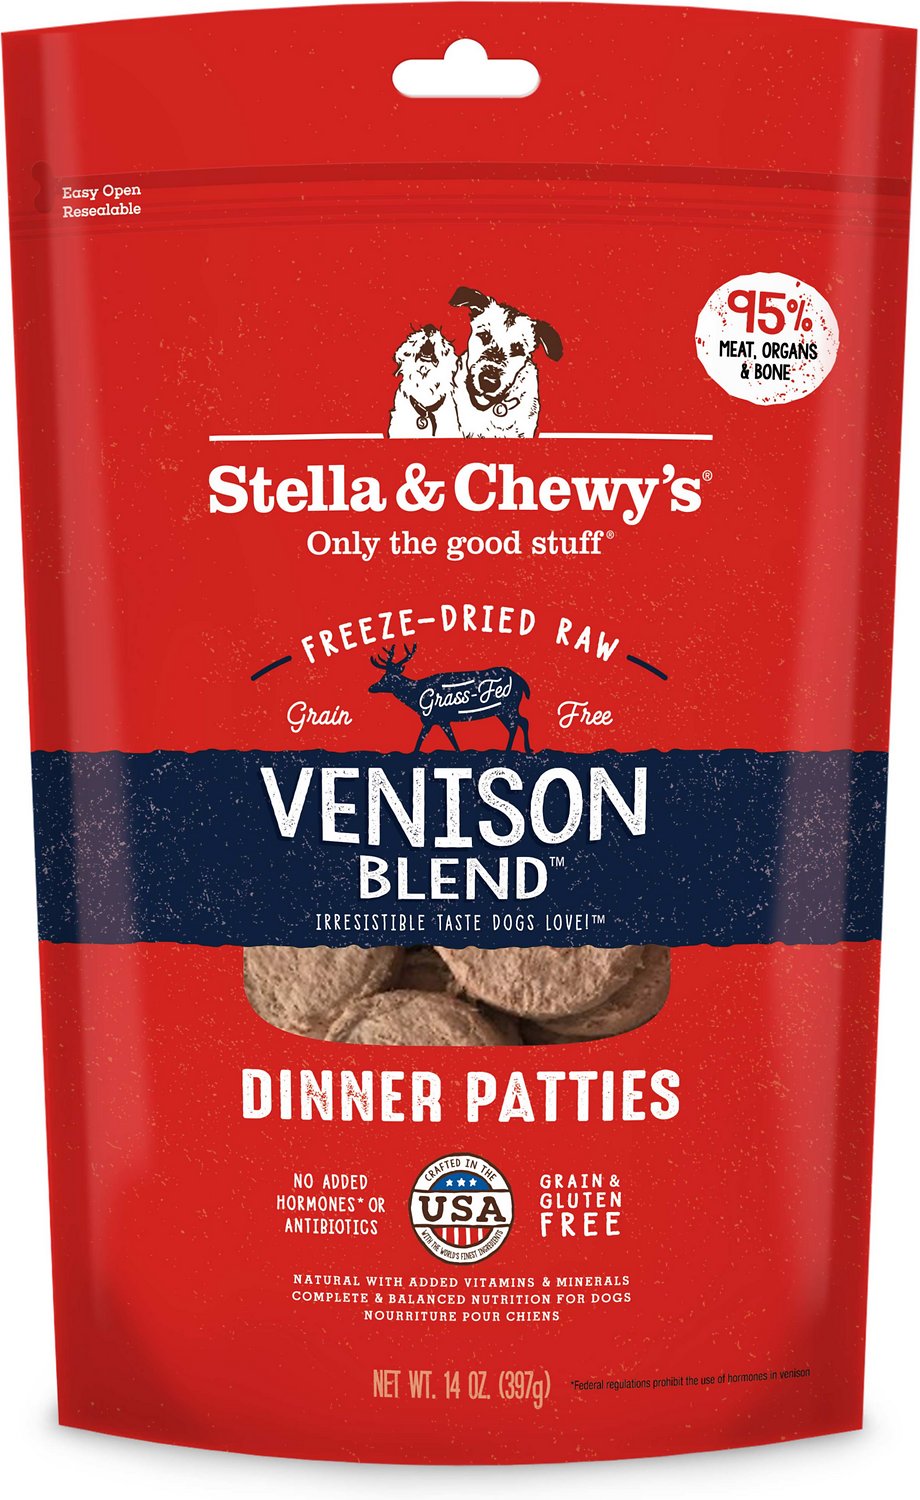 Stella & Chewy's - Venison Blend Dinner Patties Freeze-Dried Raw Dog Food - ARMOR THE POOCH